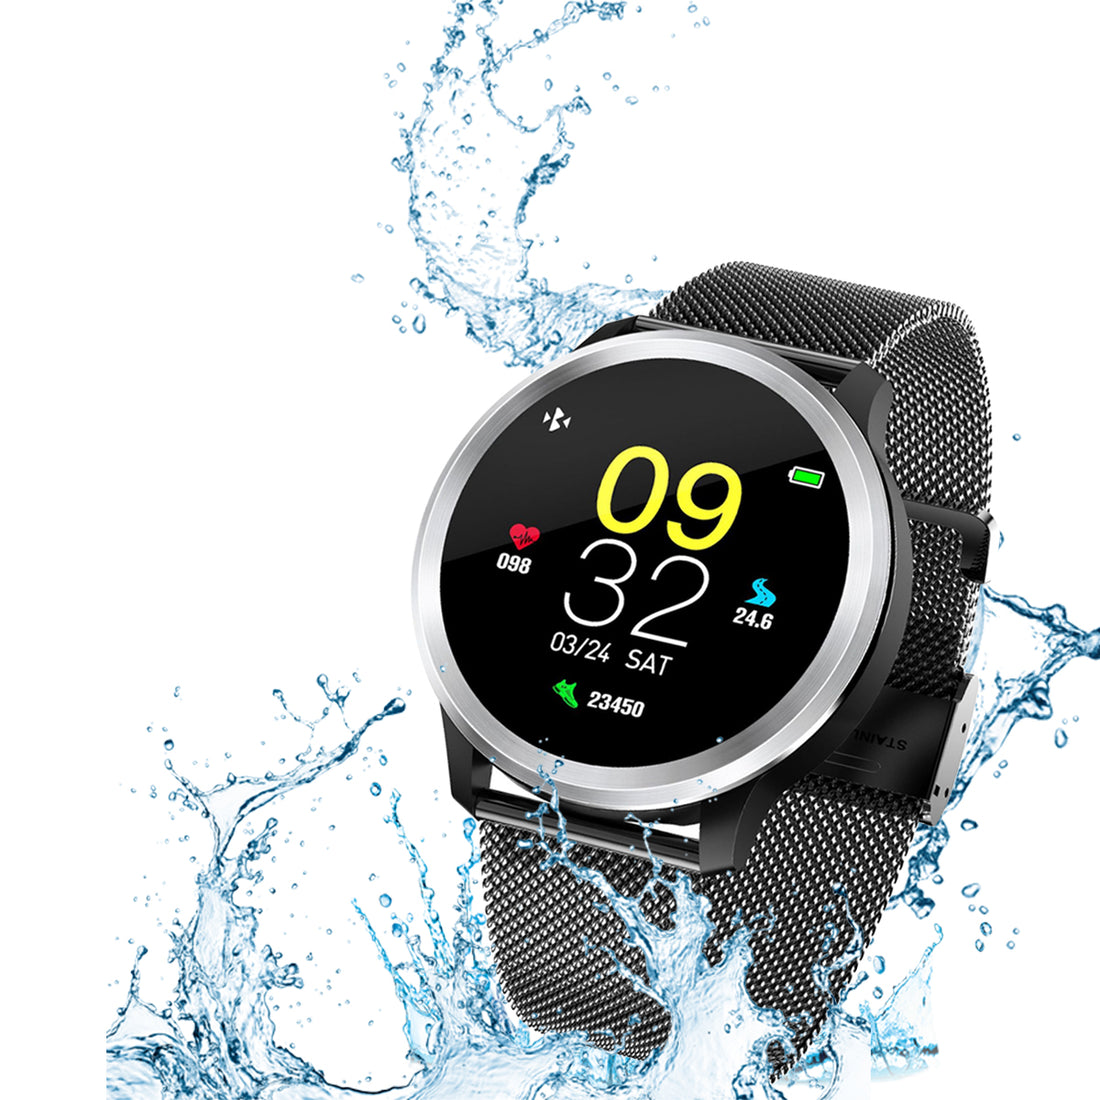 MONTRE BLUETOOTH MULTI-FONCTIONS ECG  COMPATIBLE IOS&ANDROID